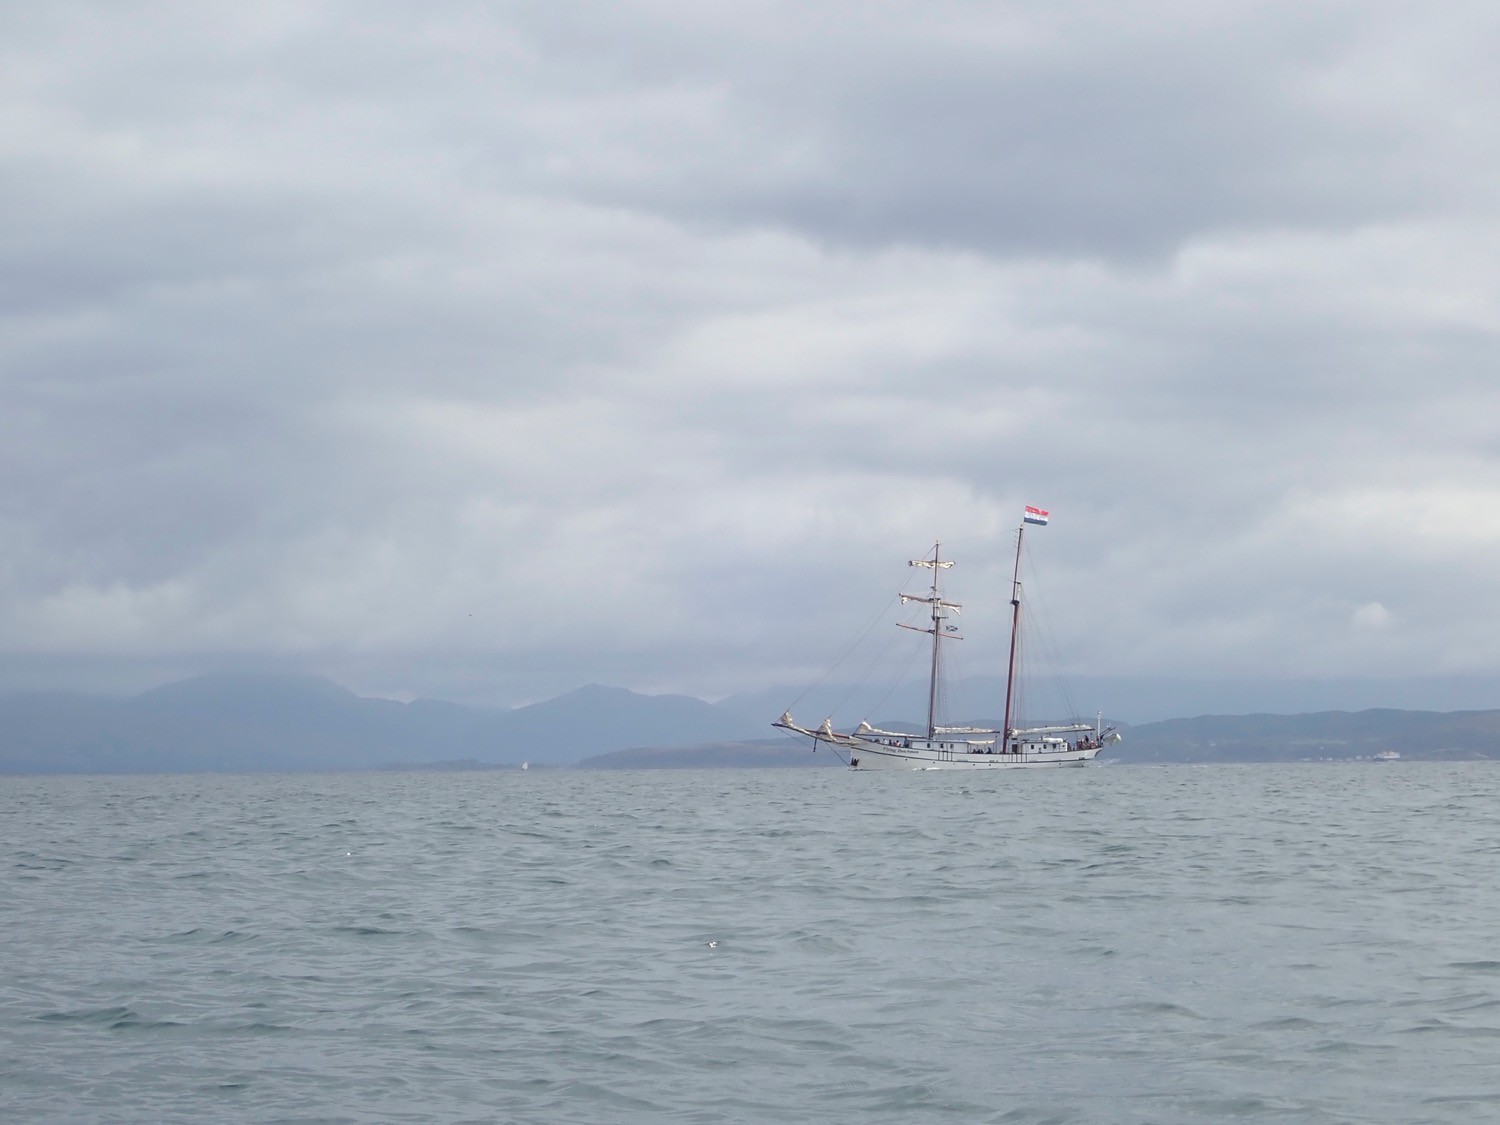 A tall ship, with no sails out